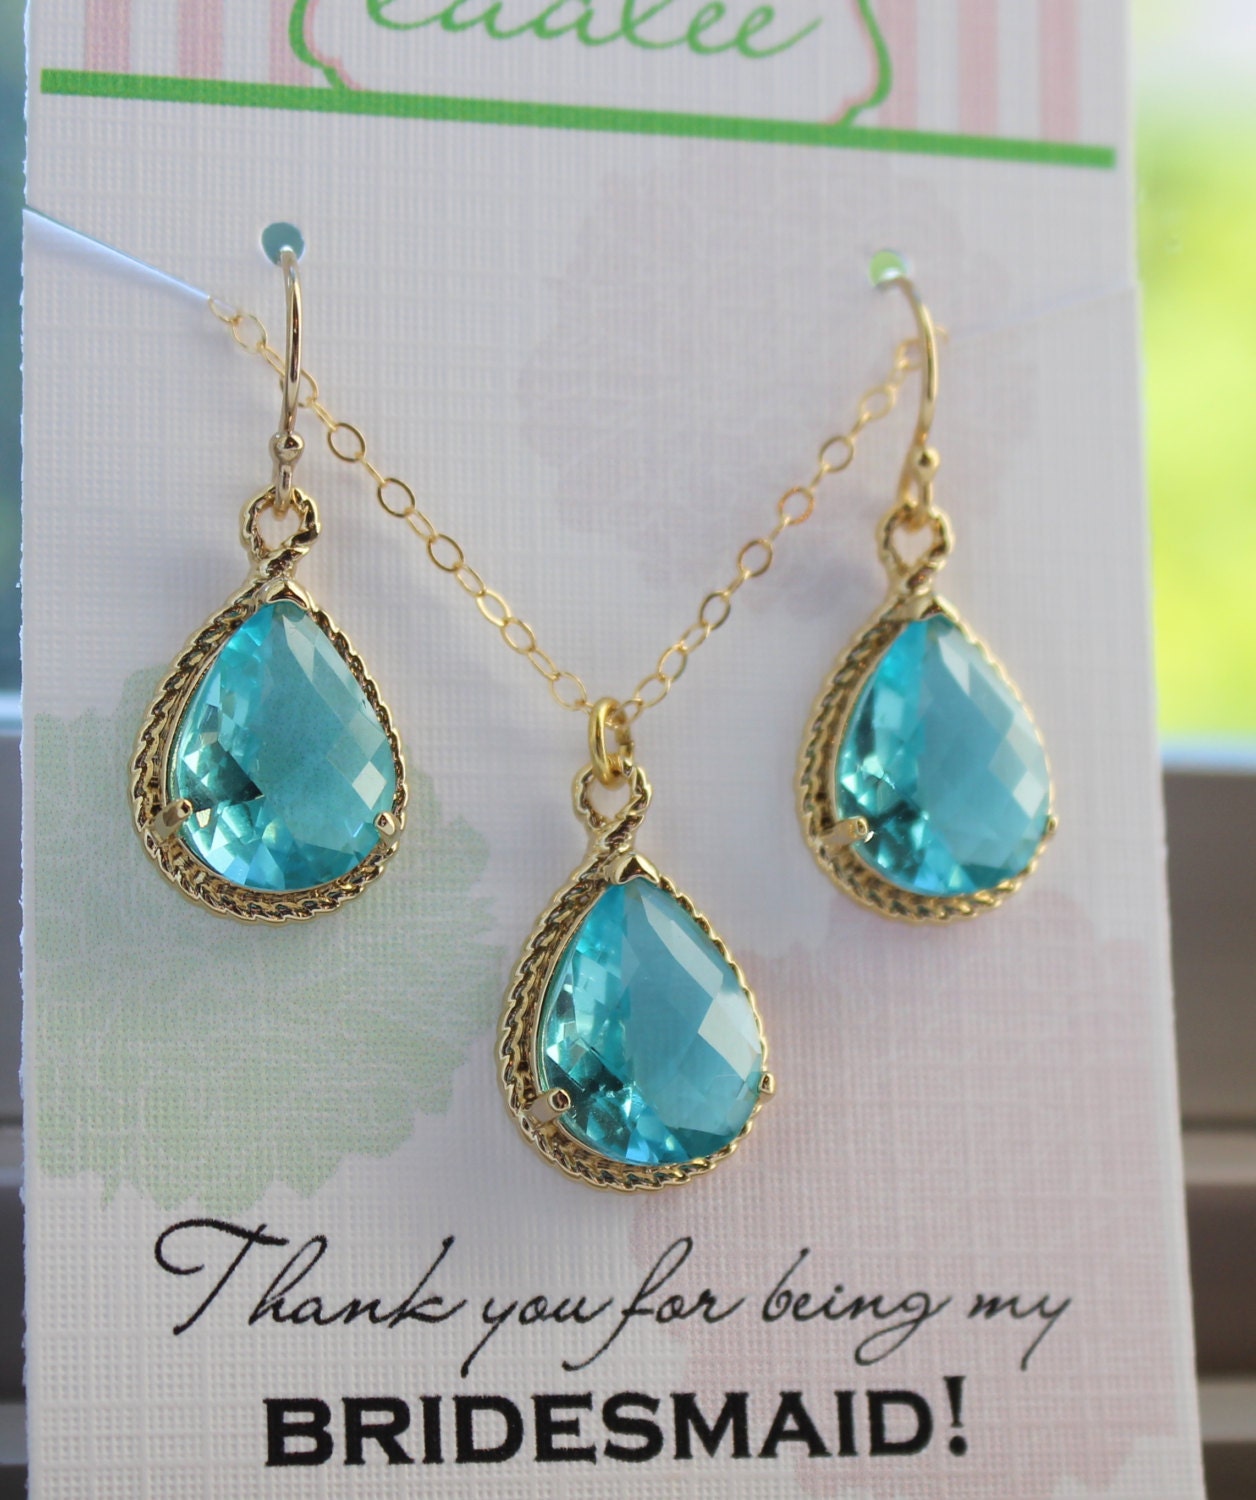 Aquamarine Necklace and Earring Set Topaz Blue Gold Jewelry Set - Personalized Card Thank you for being my bridesmaid Aquamarine Jewelry Set